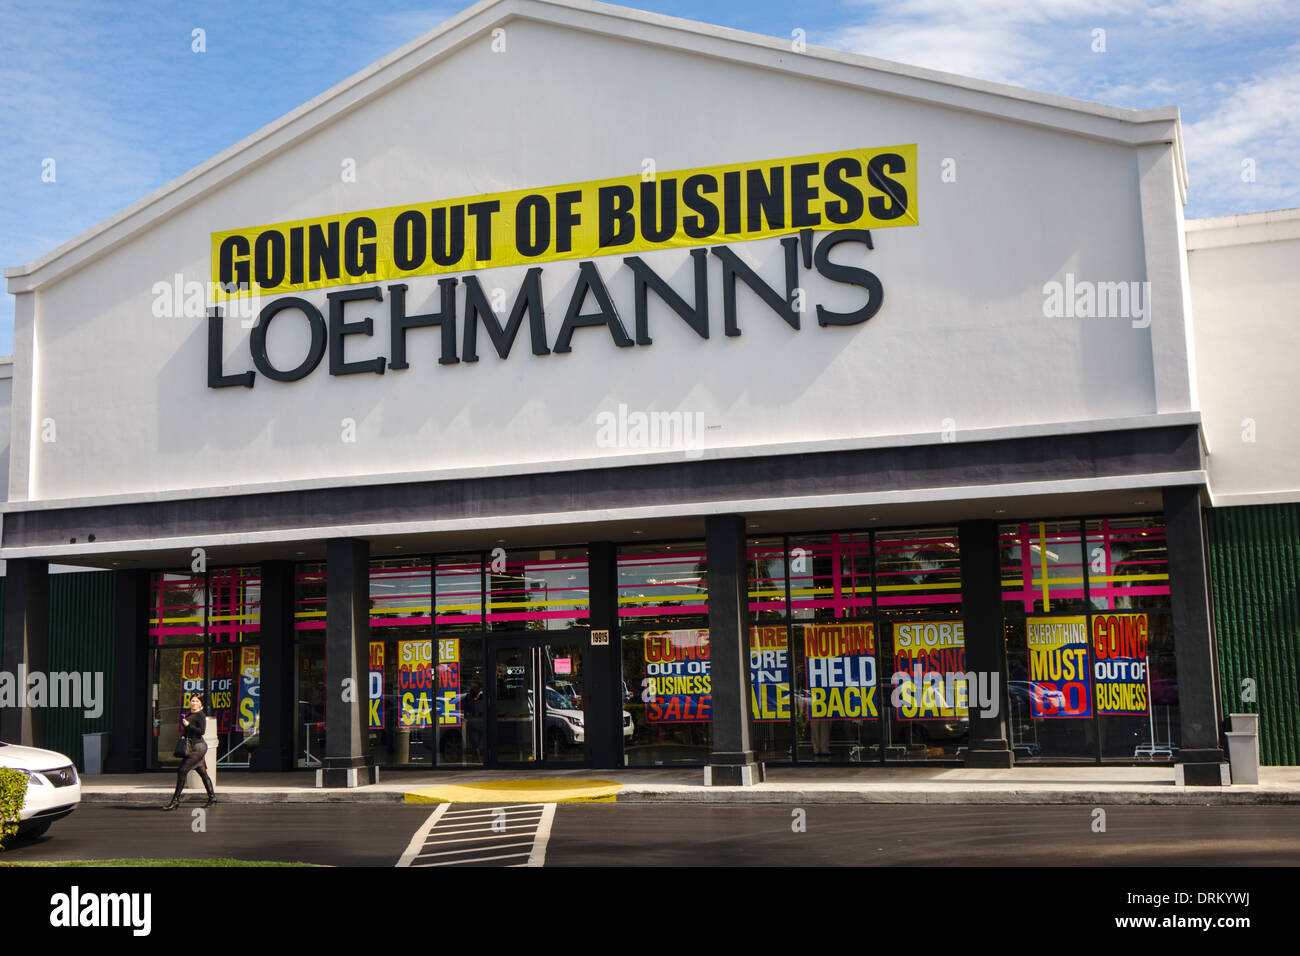 Miami Florida,Aventura,Loehmann's,front,entrance,going out of business,sign,logo,banner,clothing,apparel,visitors travel traveling tour tourist touris Stock Photo